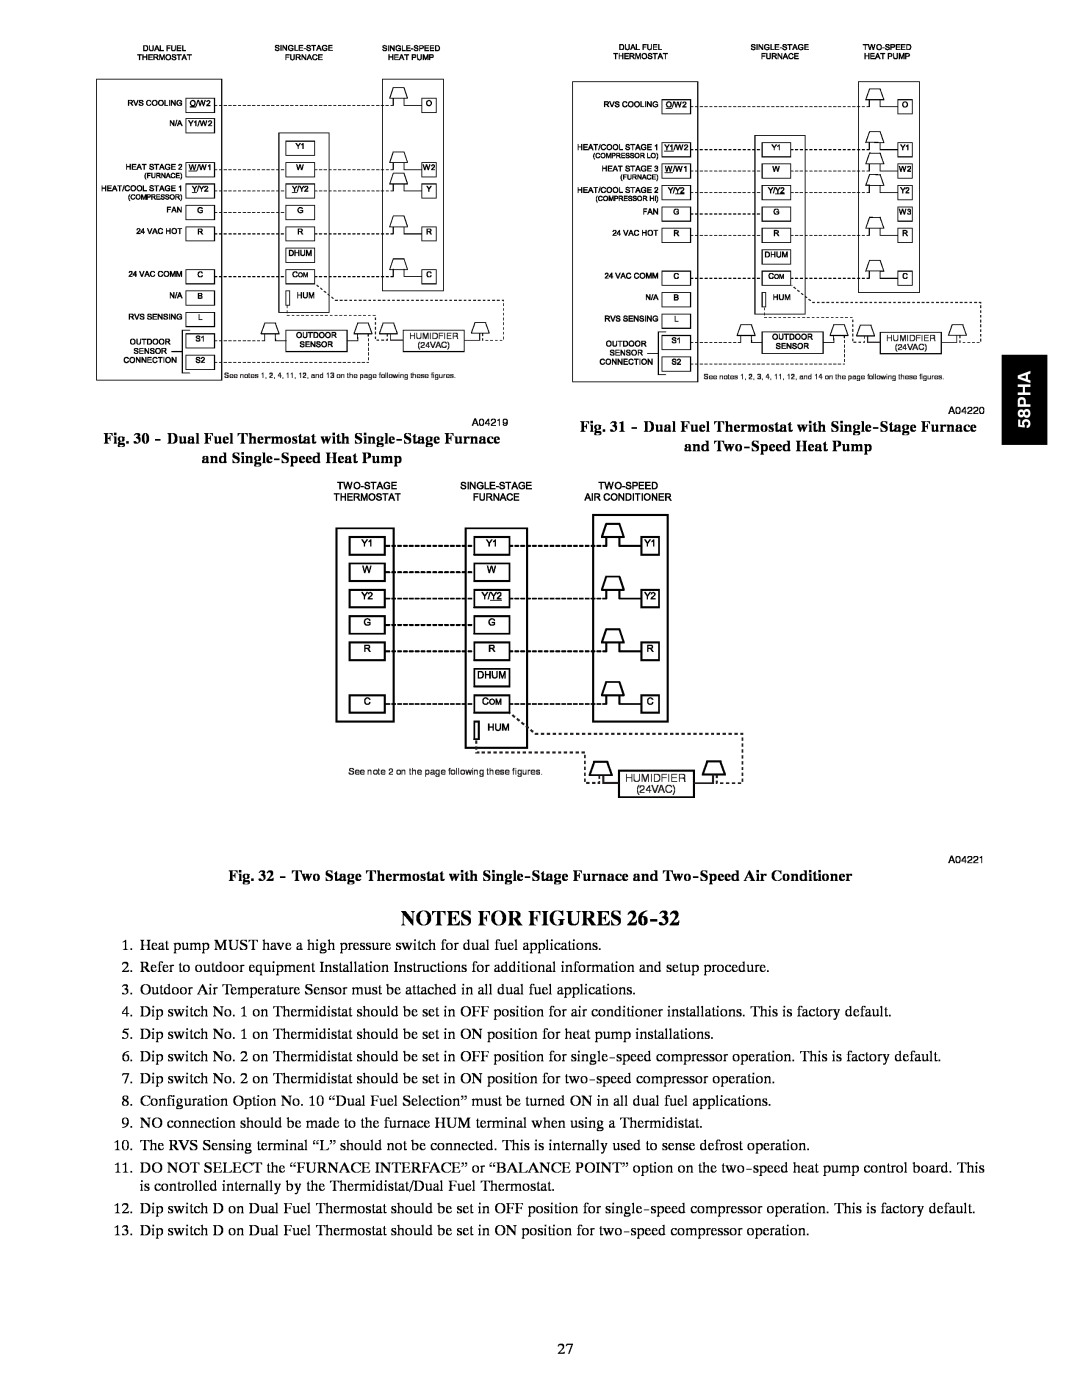 Carrier 58PHA/PHX instruction manual Notes For Figures, and Single-SpeedHeat Pump, and Two-SpeedHeat Pump 